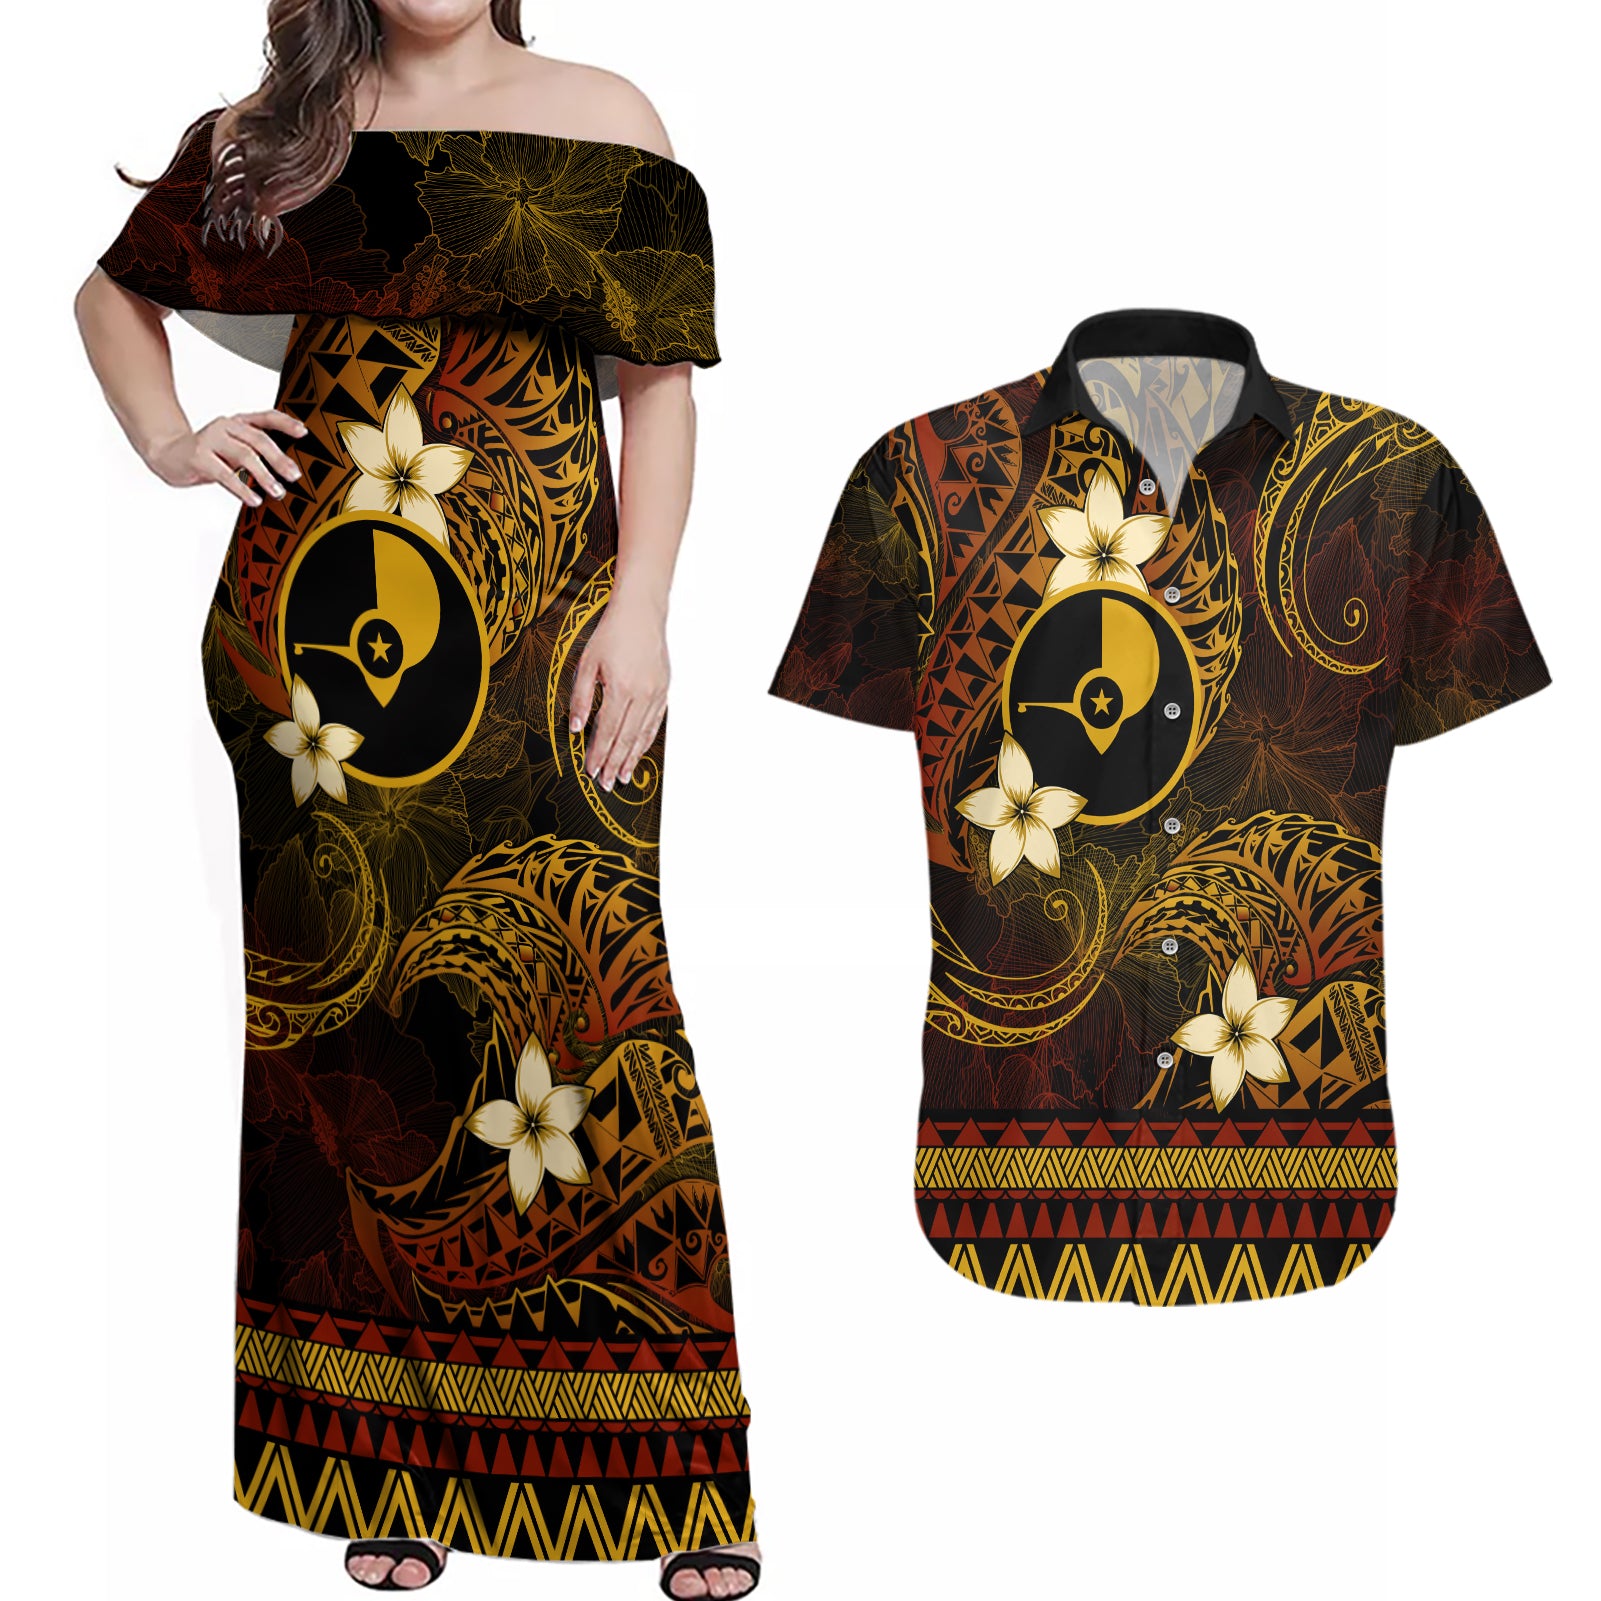 FSM Yap State Couples Matching Off Shoulder Maxi Dress and Hawaiian Shirt Tribal Pattern Gold Version LT01 Gold - Polynesian Pride